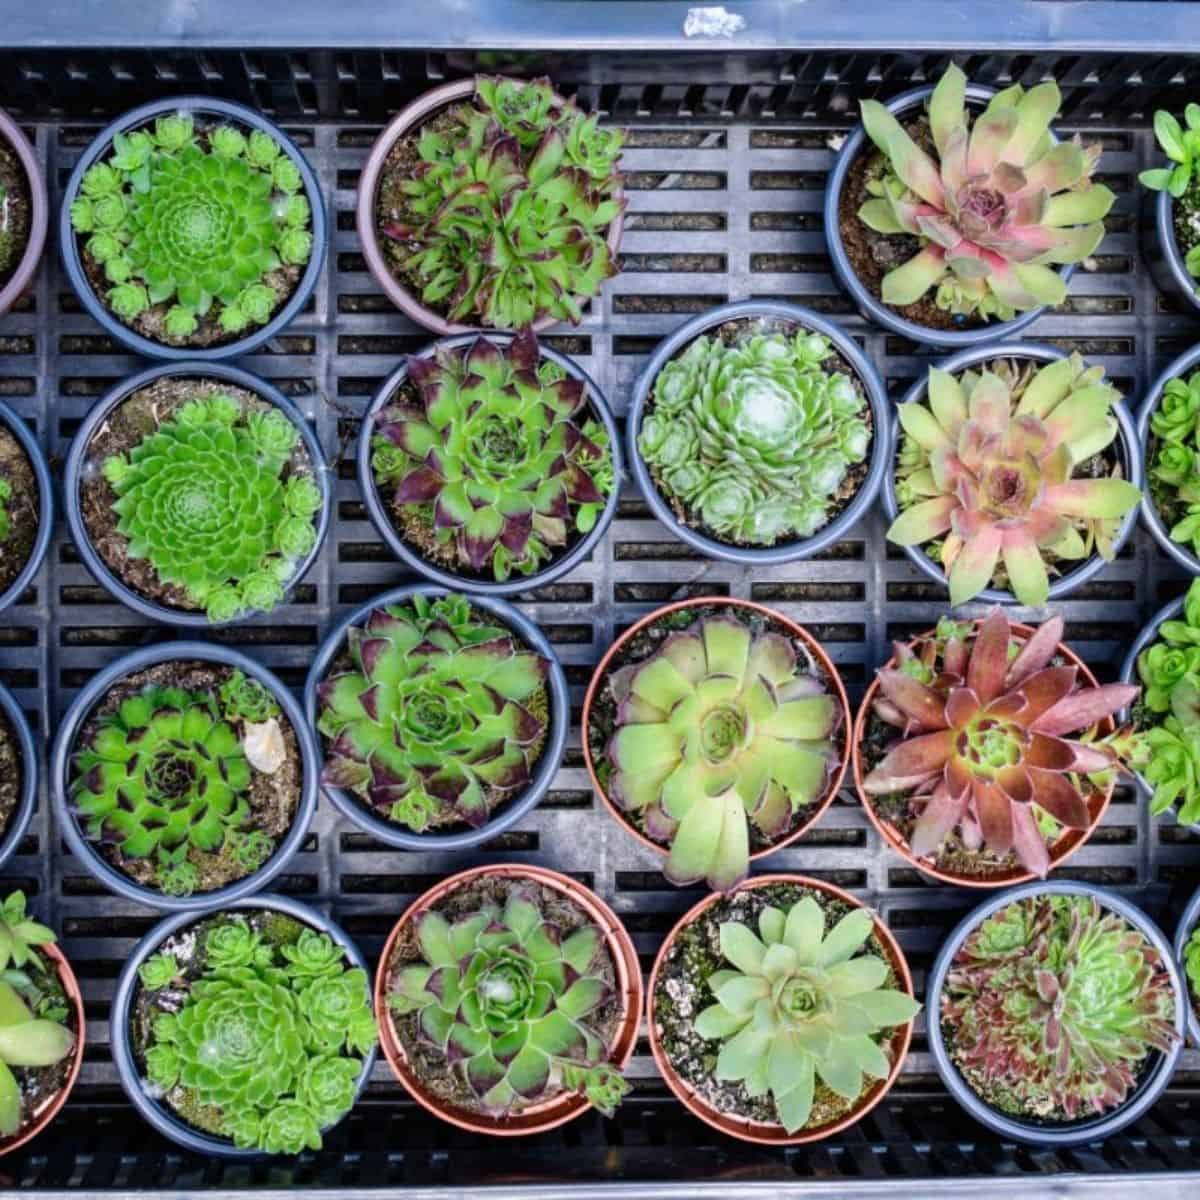 Many succulents in a pots in a plastic crate.